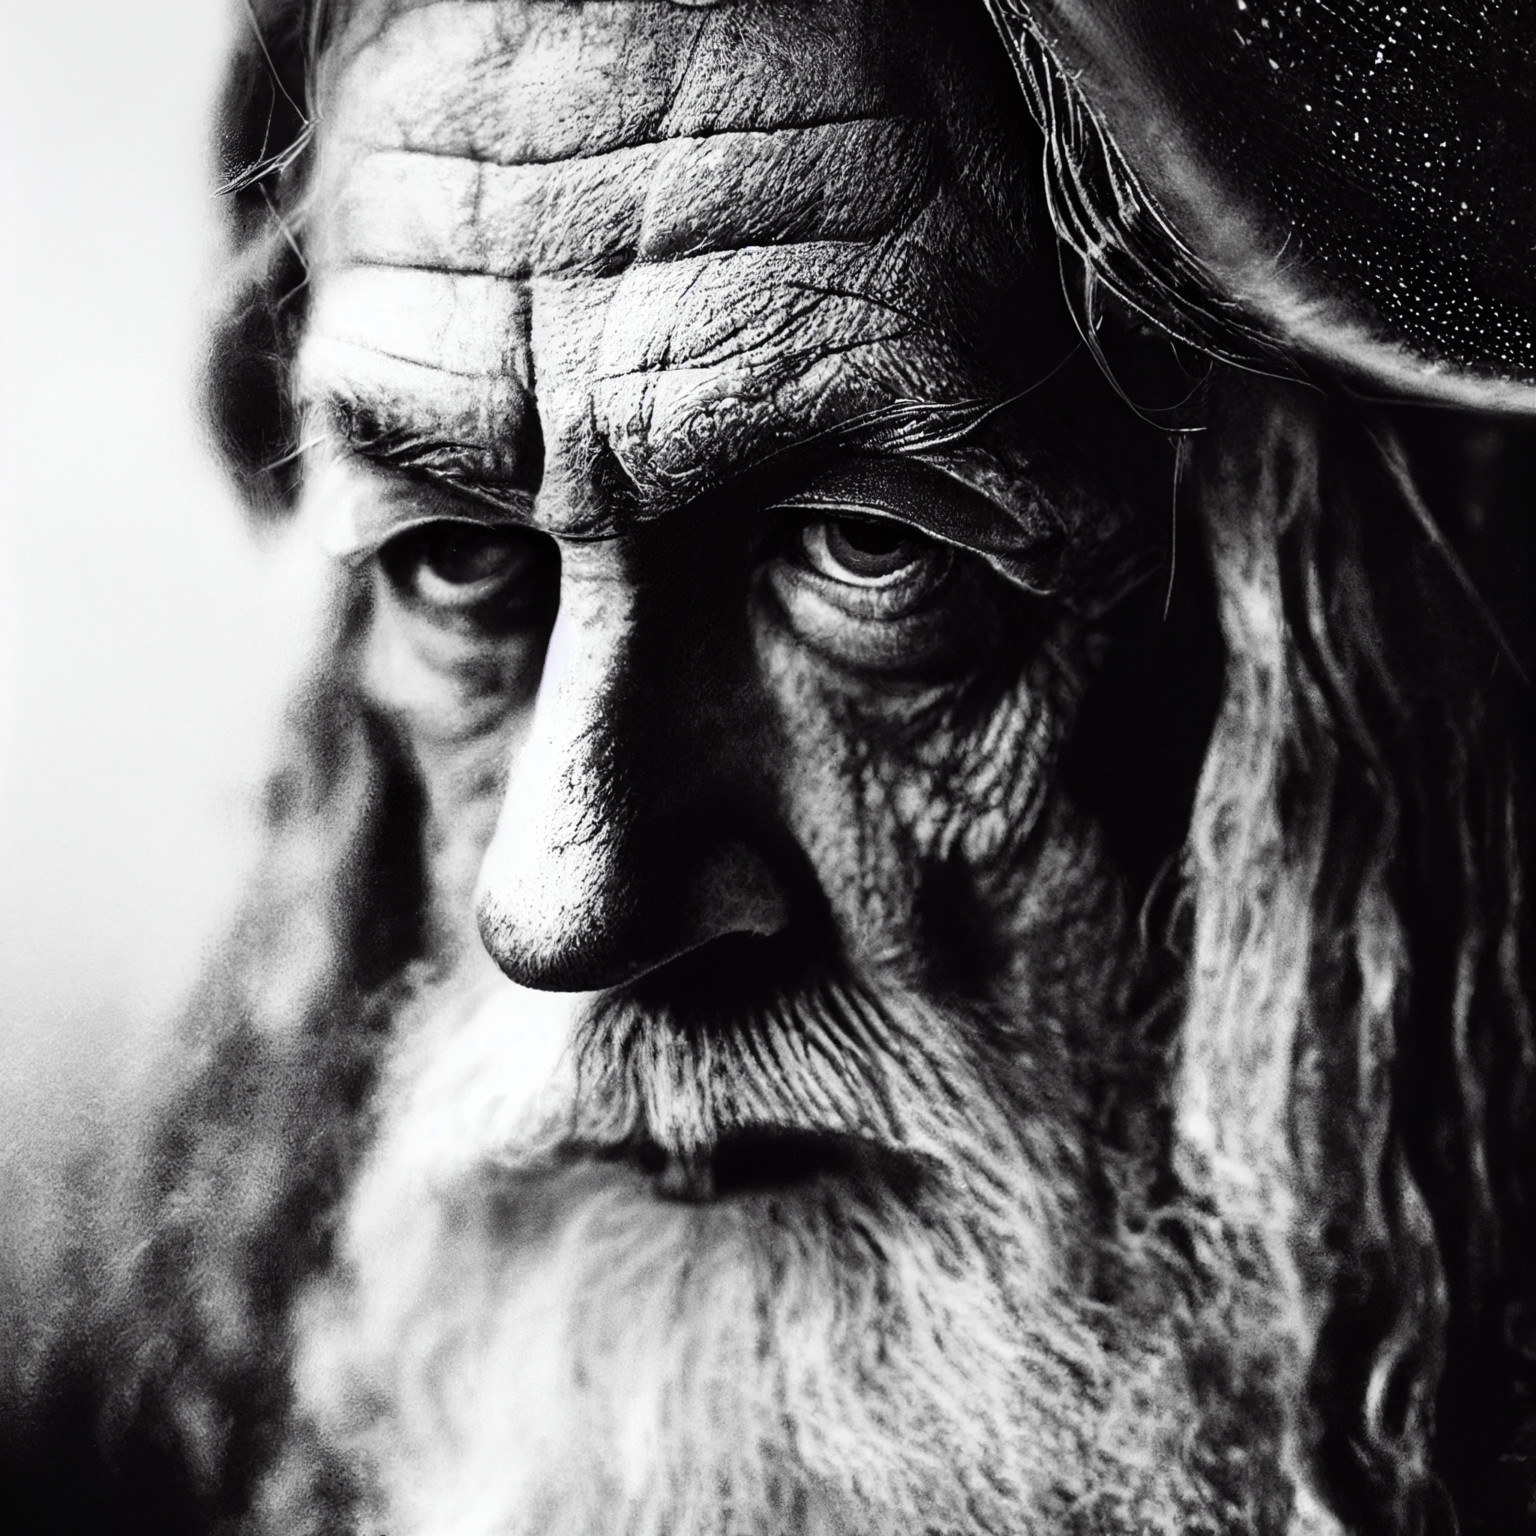 A monochrome portrait of Gandalf as imagined by Midjourney